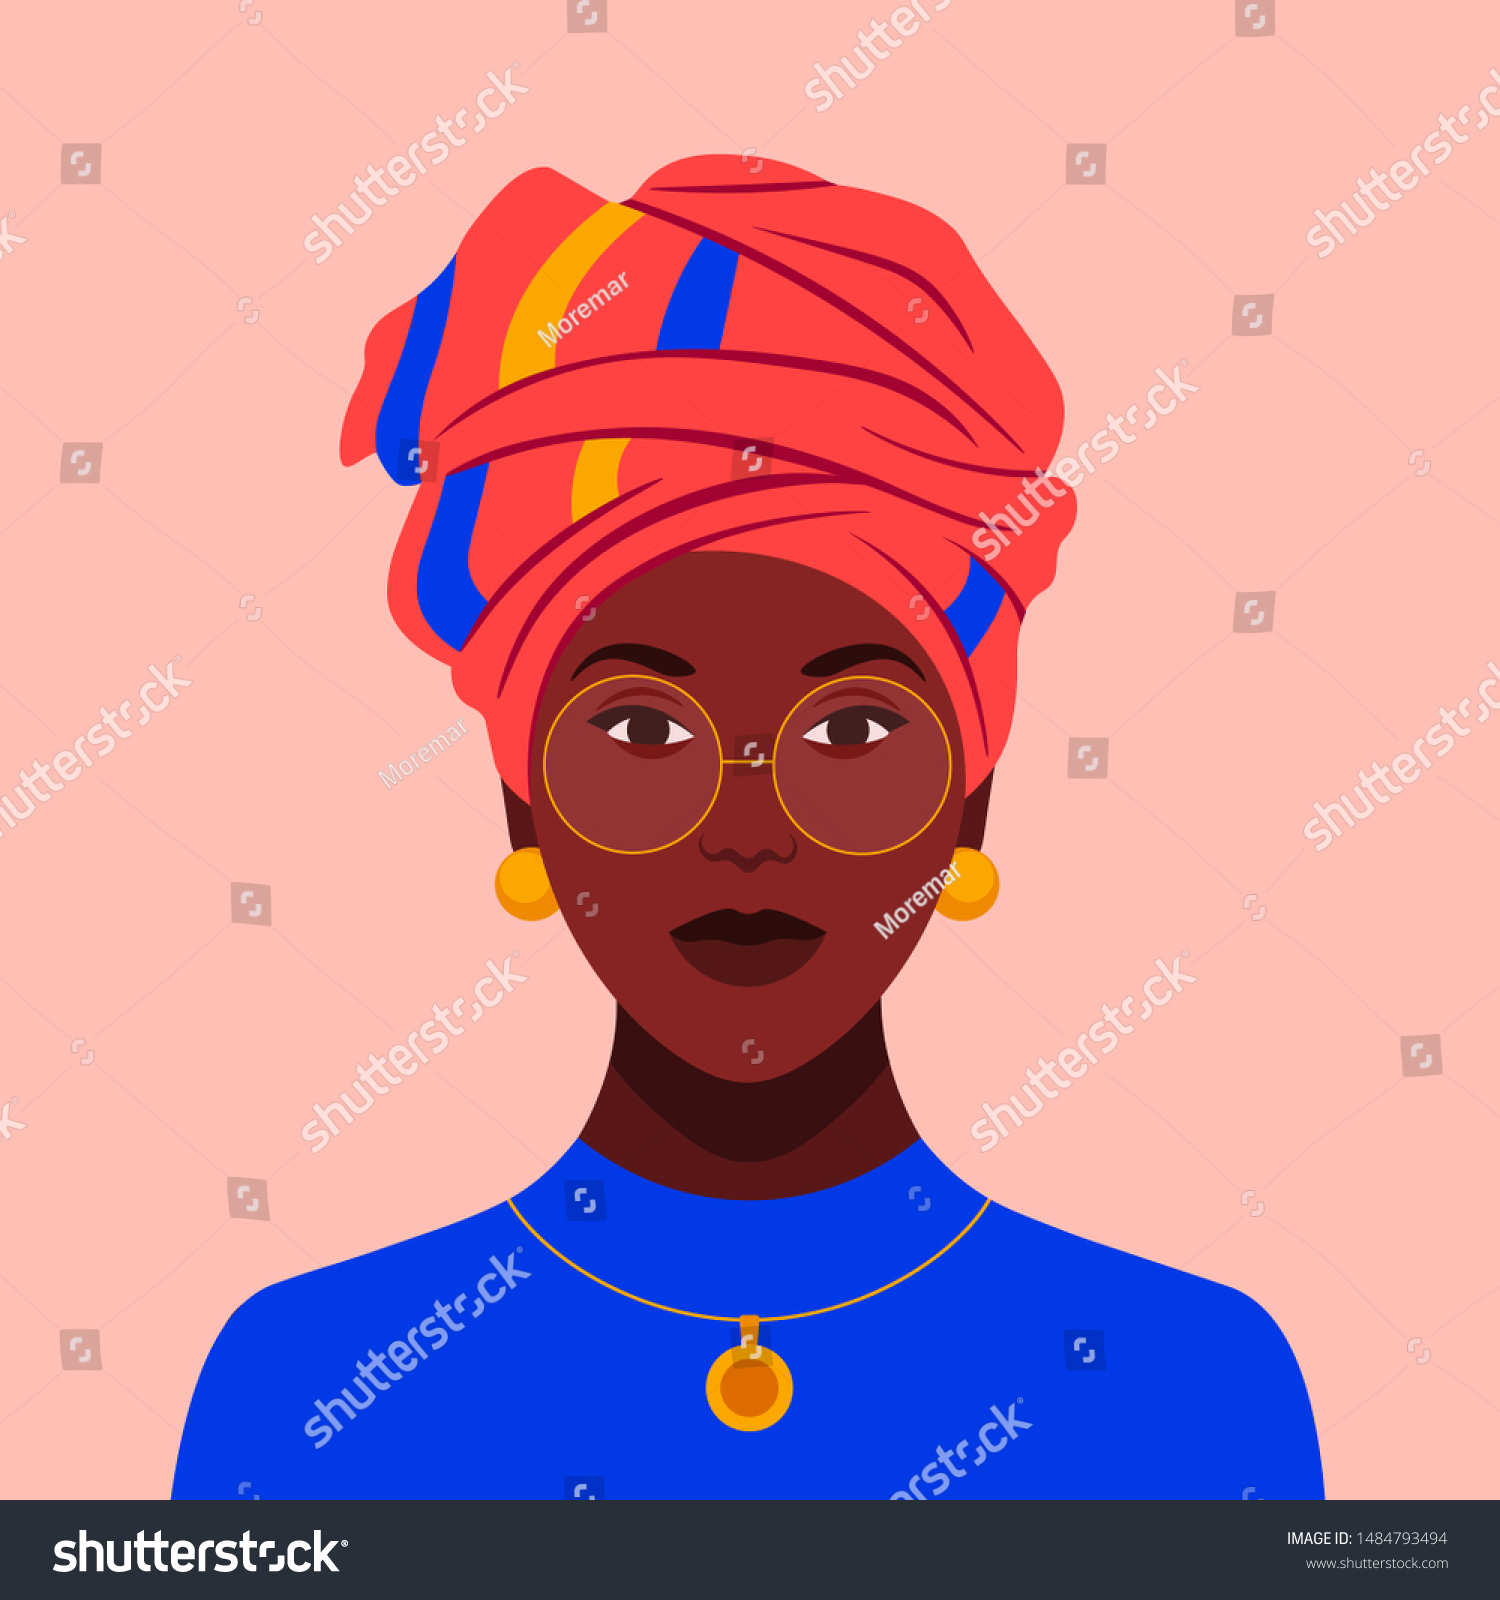 African Woman Glasses Traditional Headdress Avatar Stock Vector Royalty Free 1484793494 0611